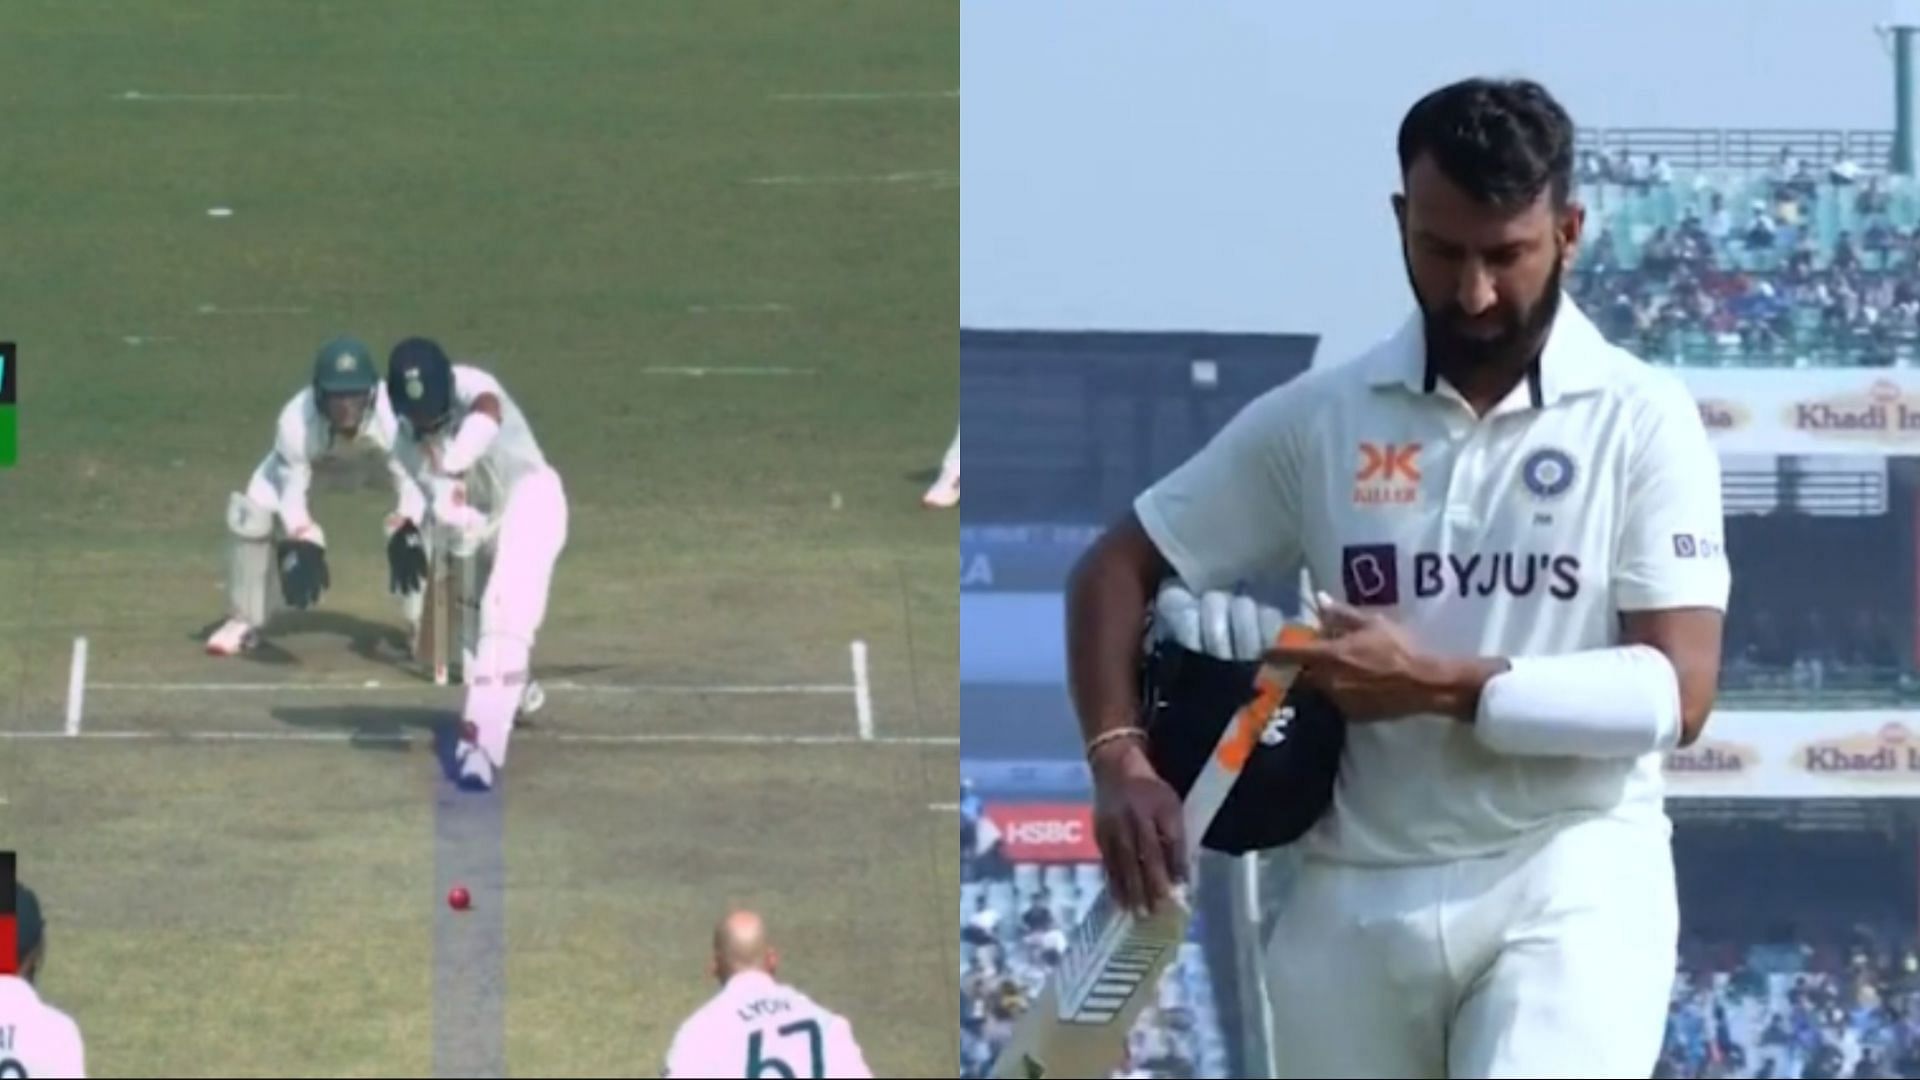 Cheteshwar Pujara failed to open his account today (Image: BCCI)